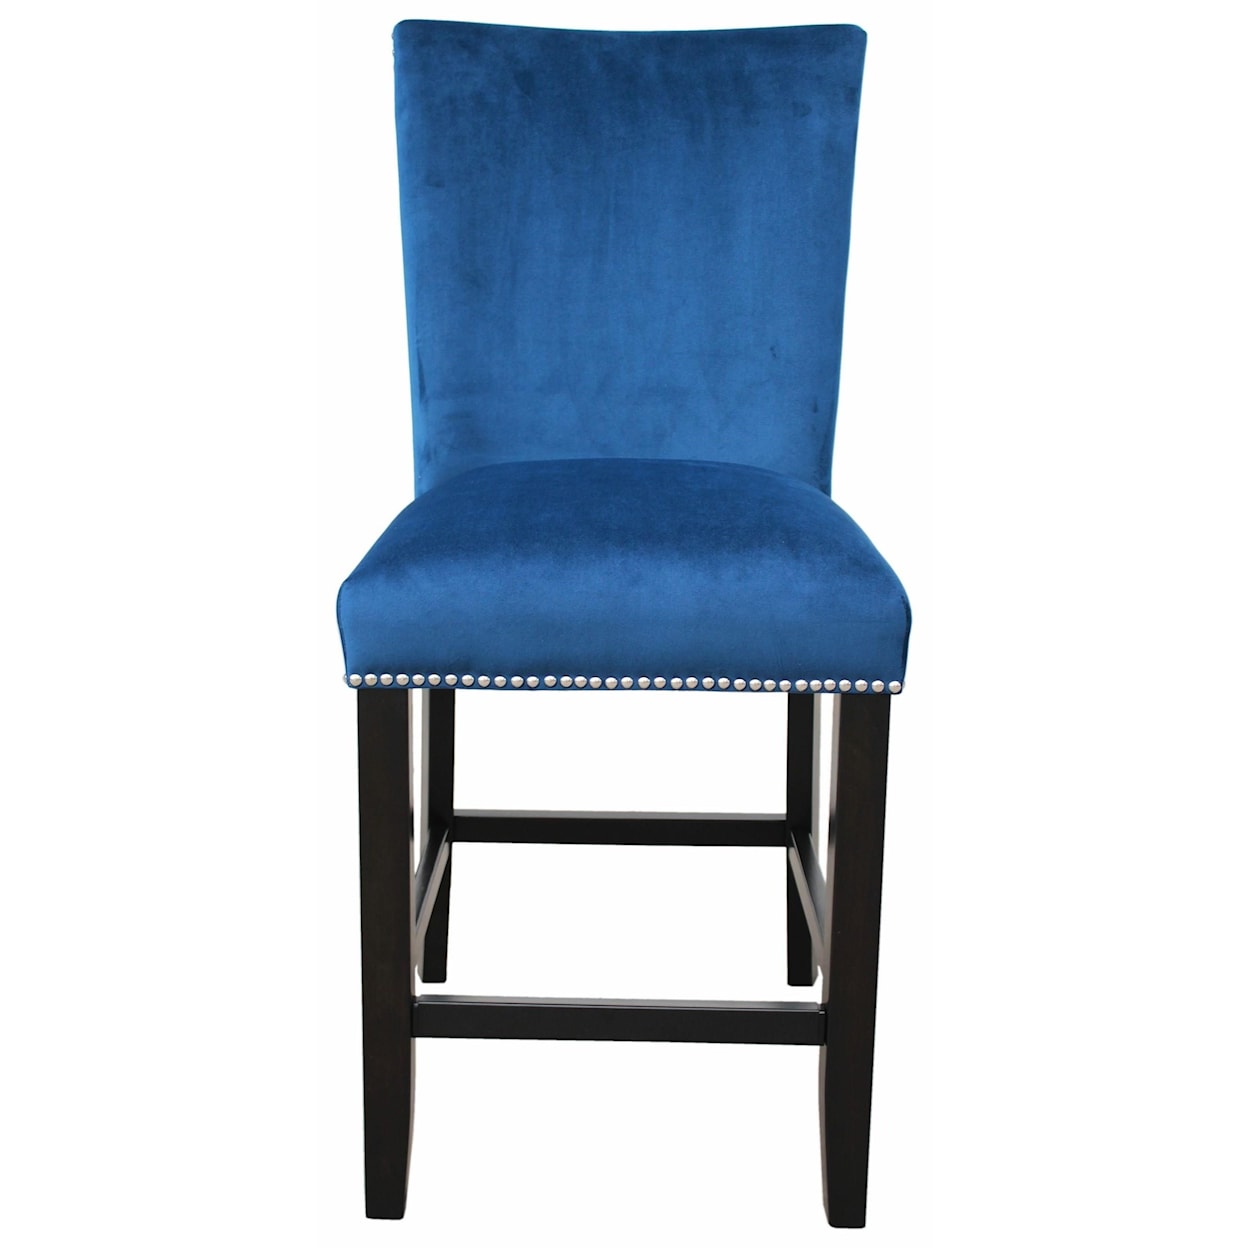 Steve Silver Camila Upholstered Counter Chair with Nailhead